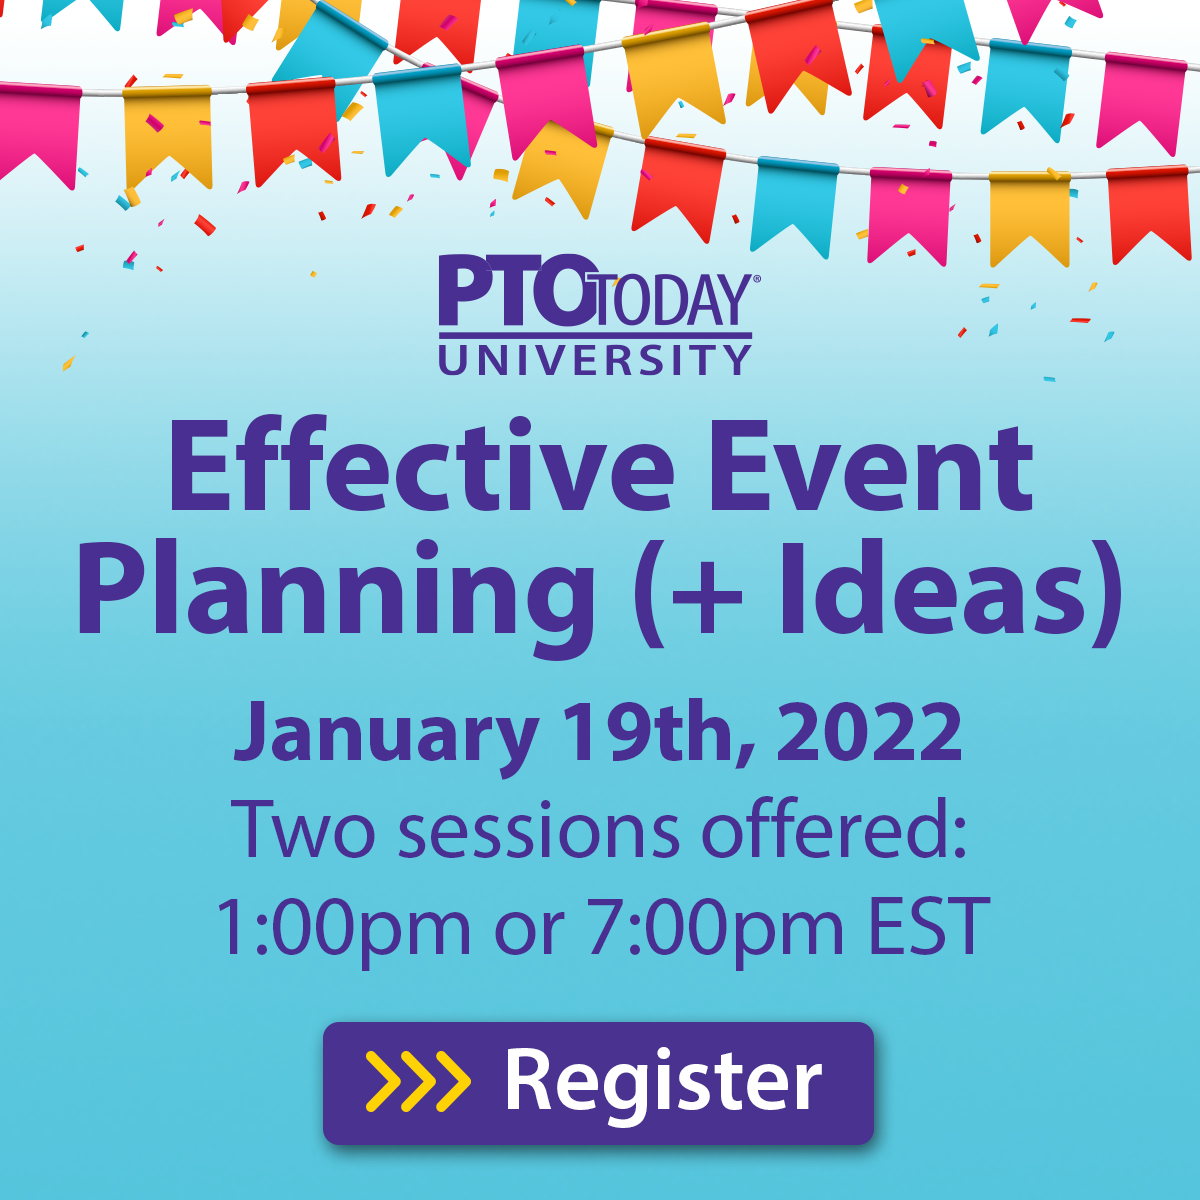 PTO Today University: Effective Event Planning